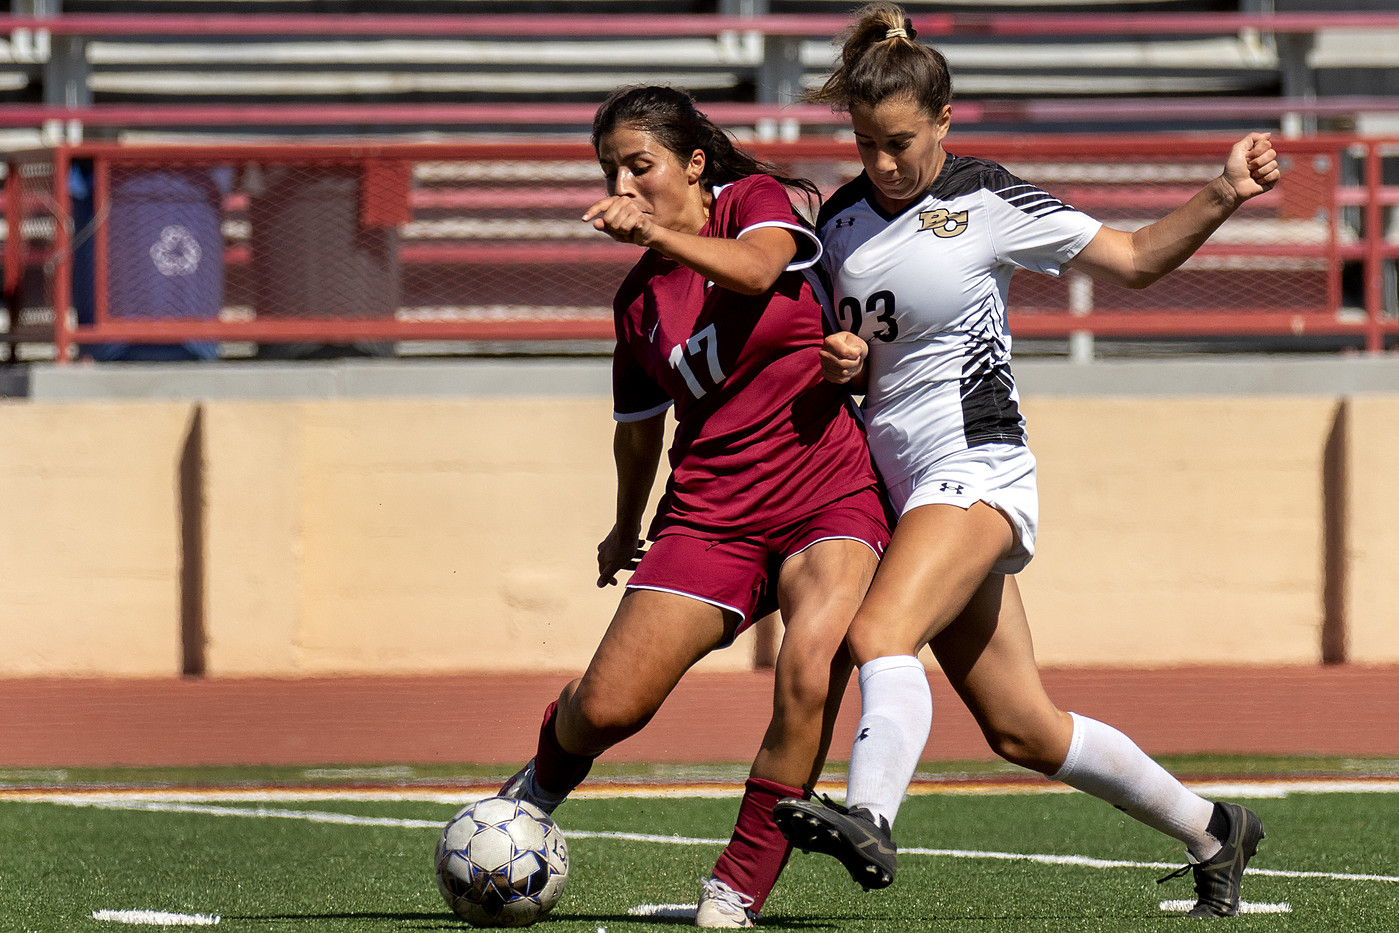 The Mustangs beat the Panthers 4-0 in a non-conference game at Hughes Stadium on Friday afternoon